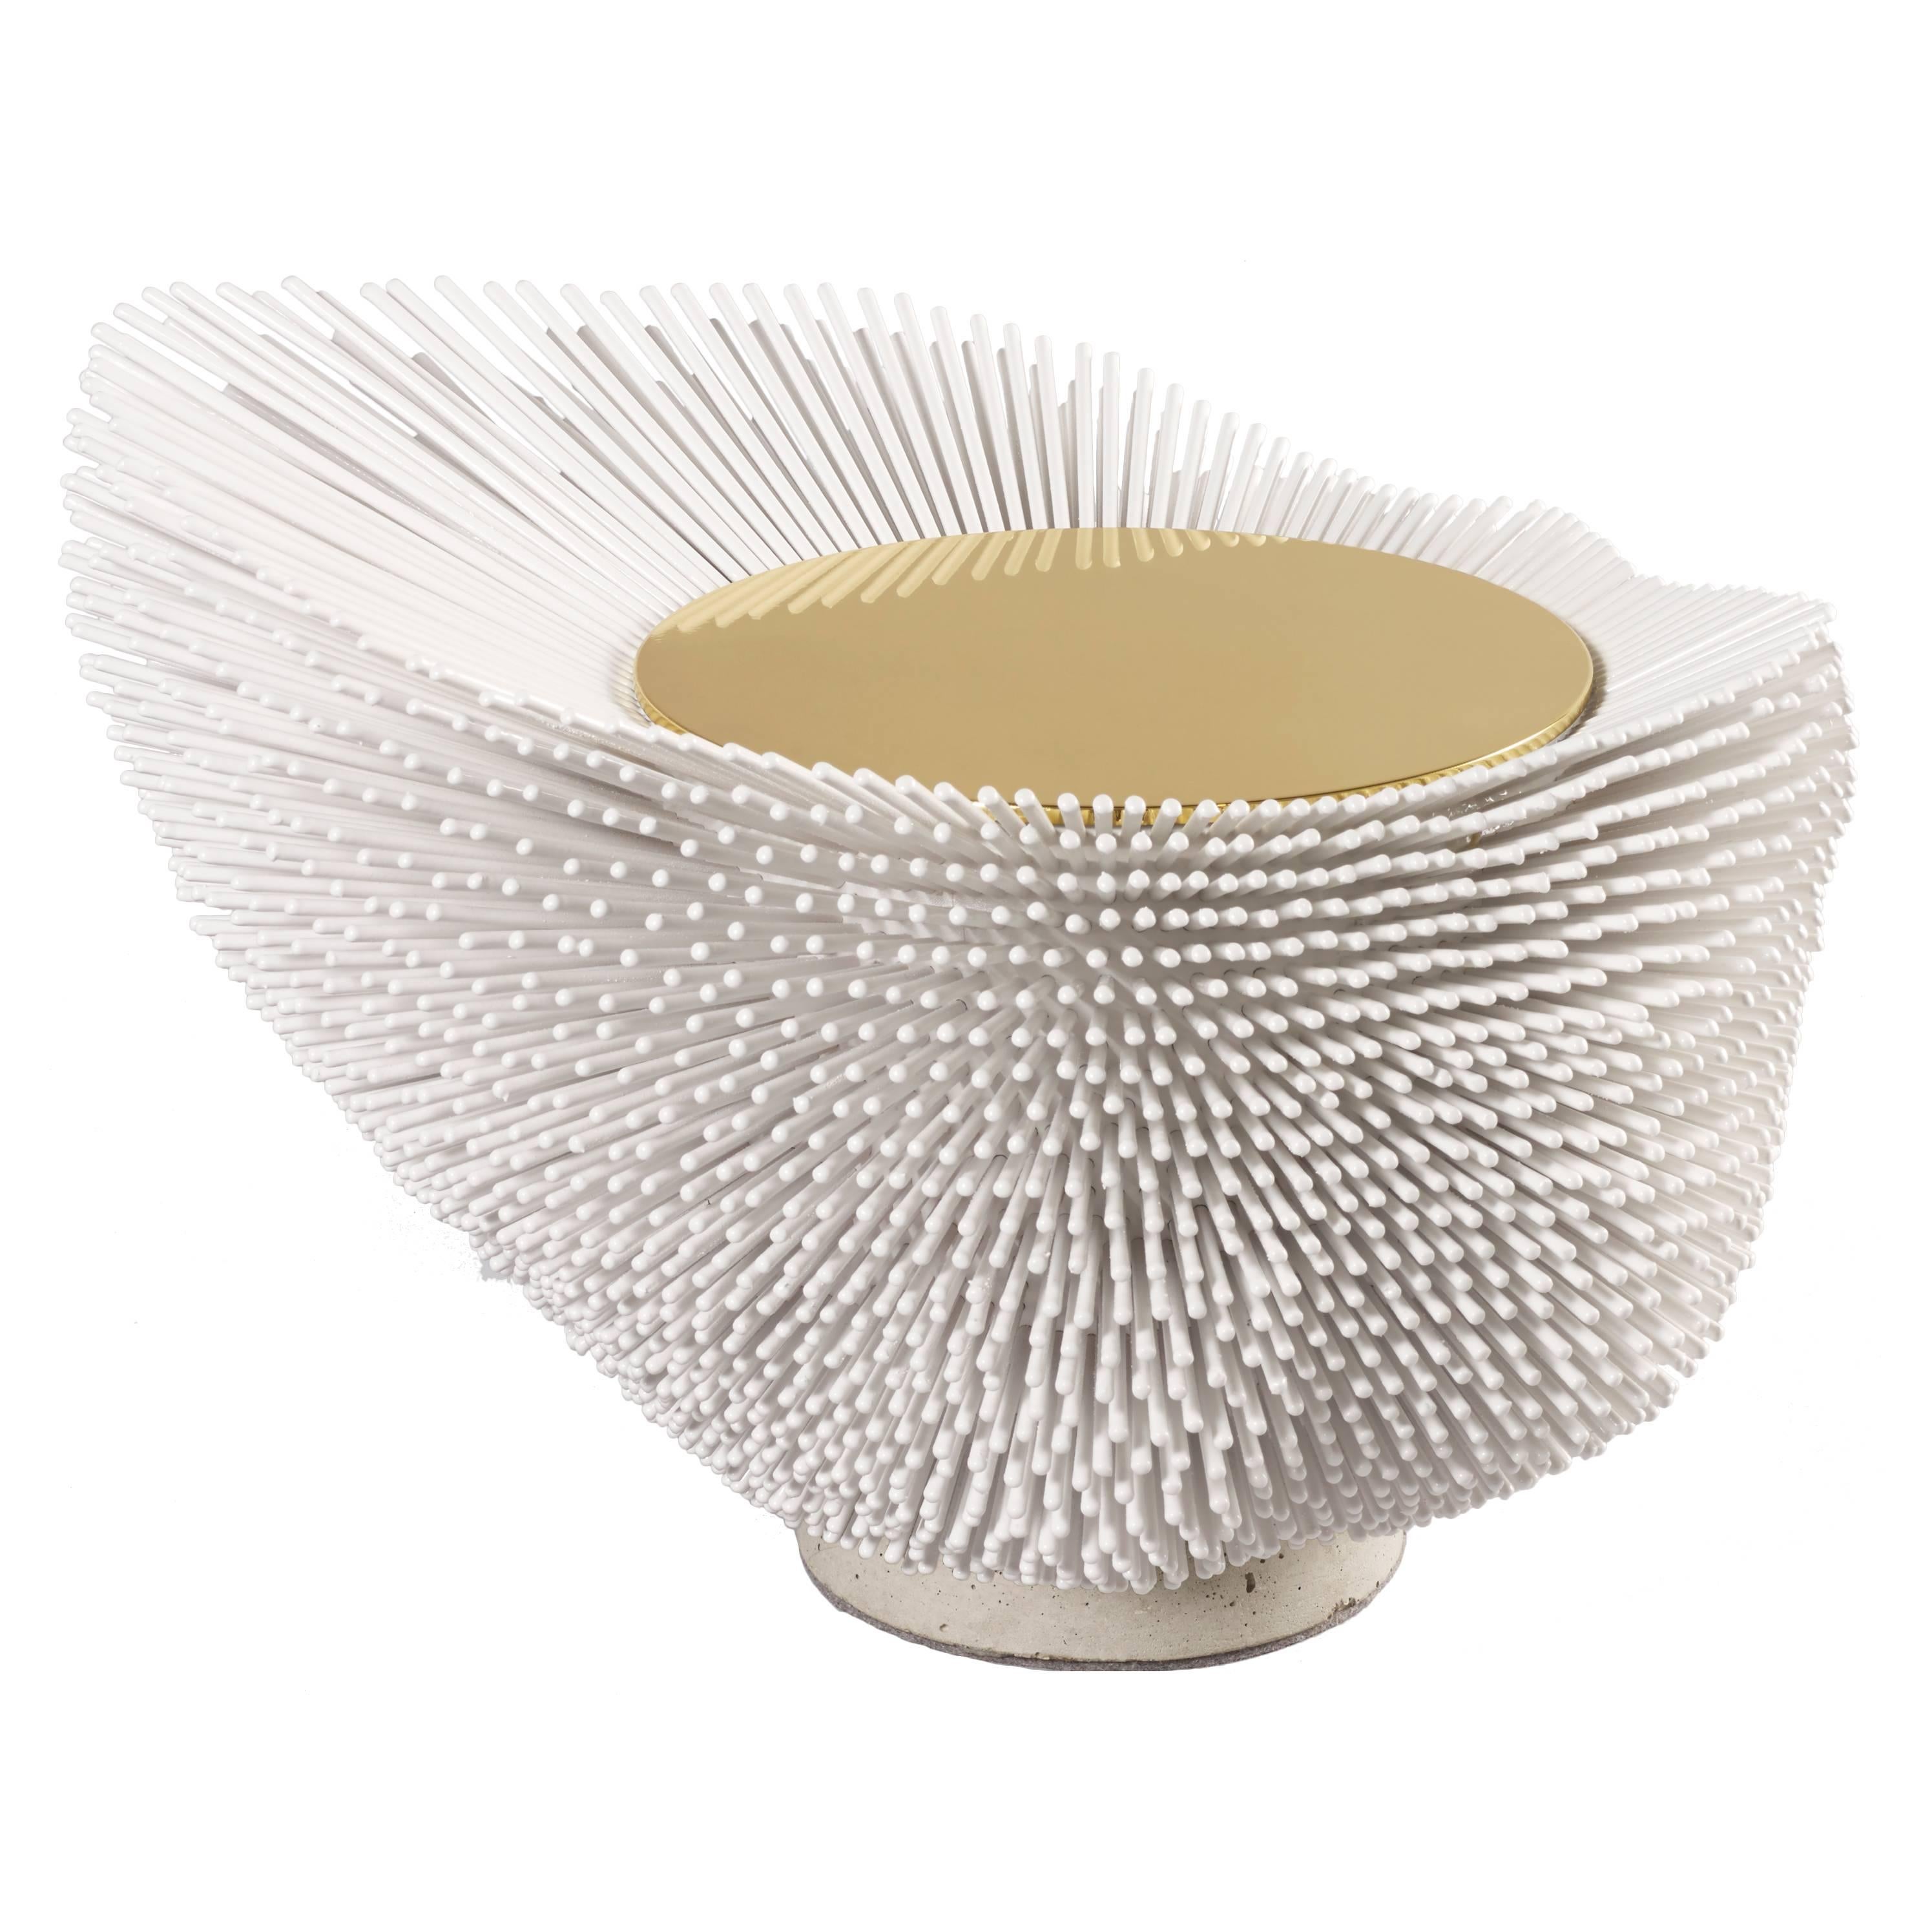 'Sea Anemone' Side Table by Pia Maria Raeder